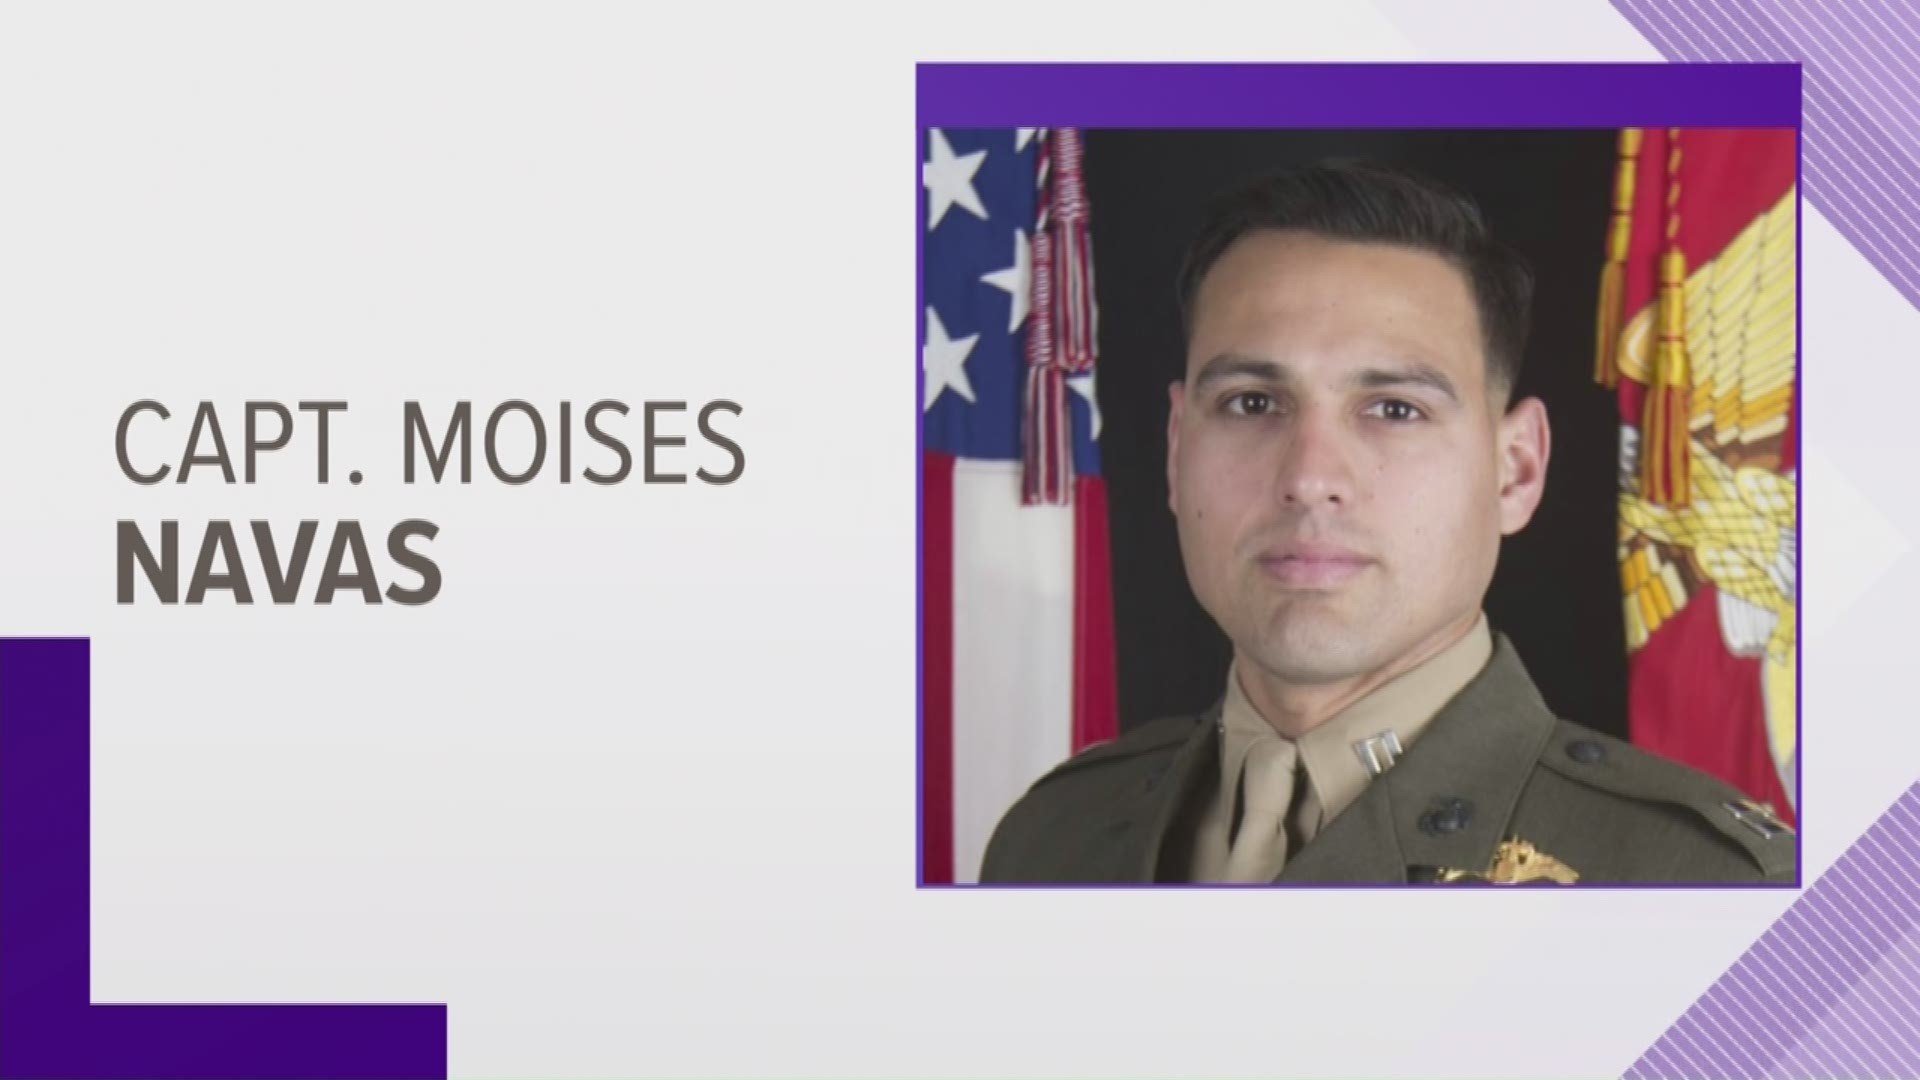 Capt. Moises A. Navas and Gunnery Sgt. Diego D. Pongo have been identified as the Marines killed by enemy forces.